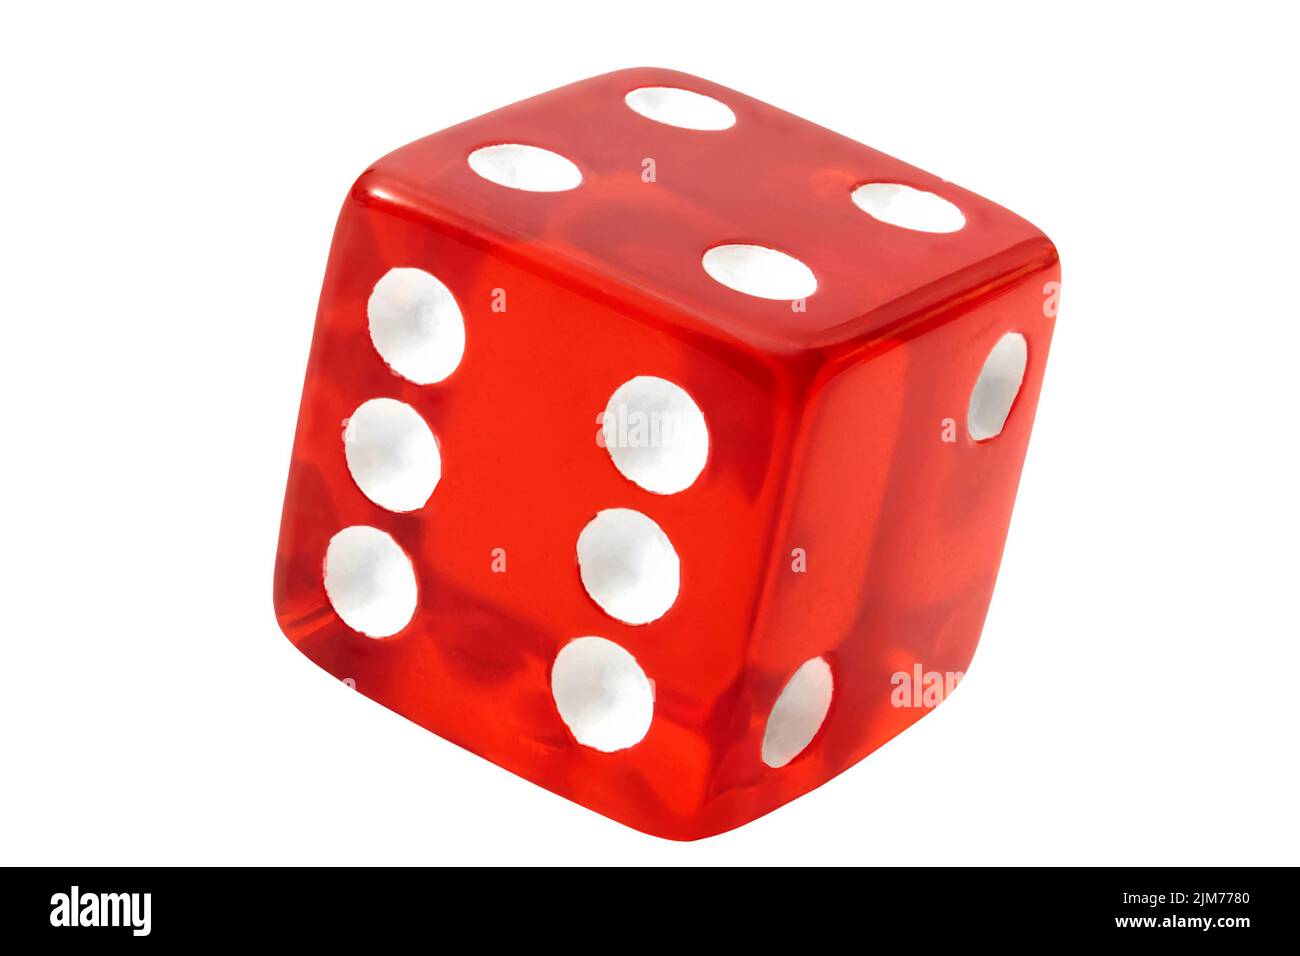 One single die used in the casino game of craps showing 4 on top isolated on white background with clipping path cutout concept for playing board game Stock Photo